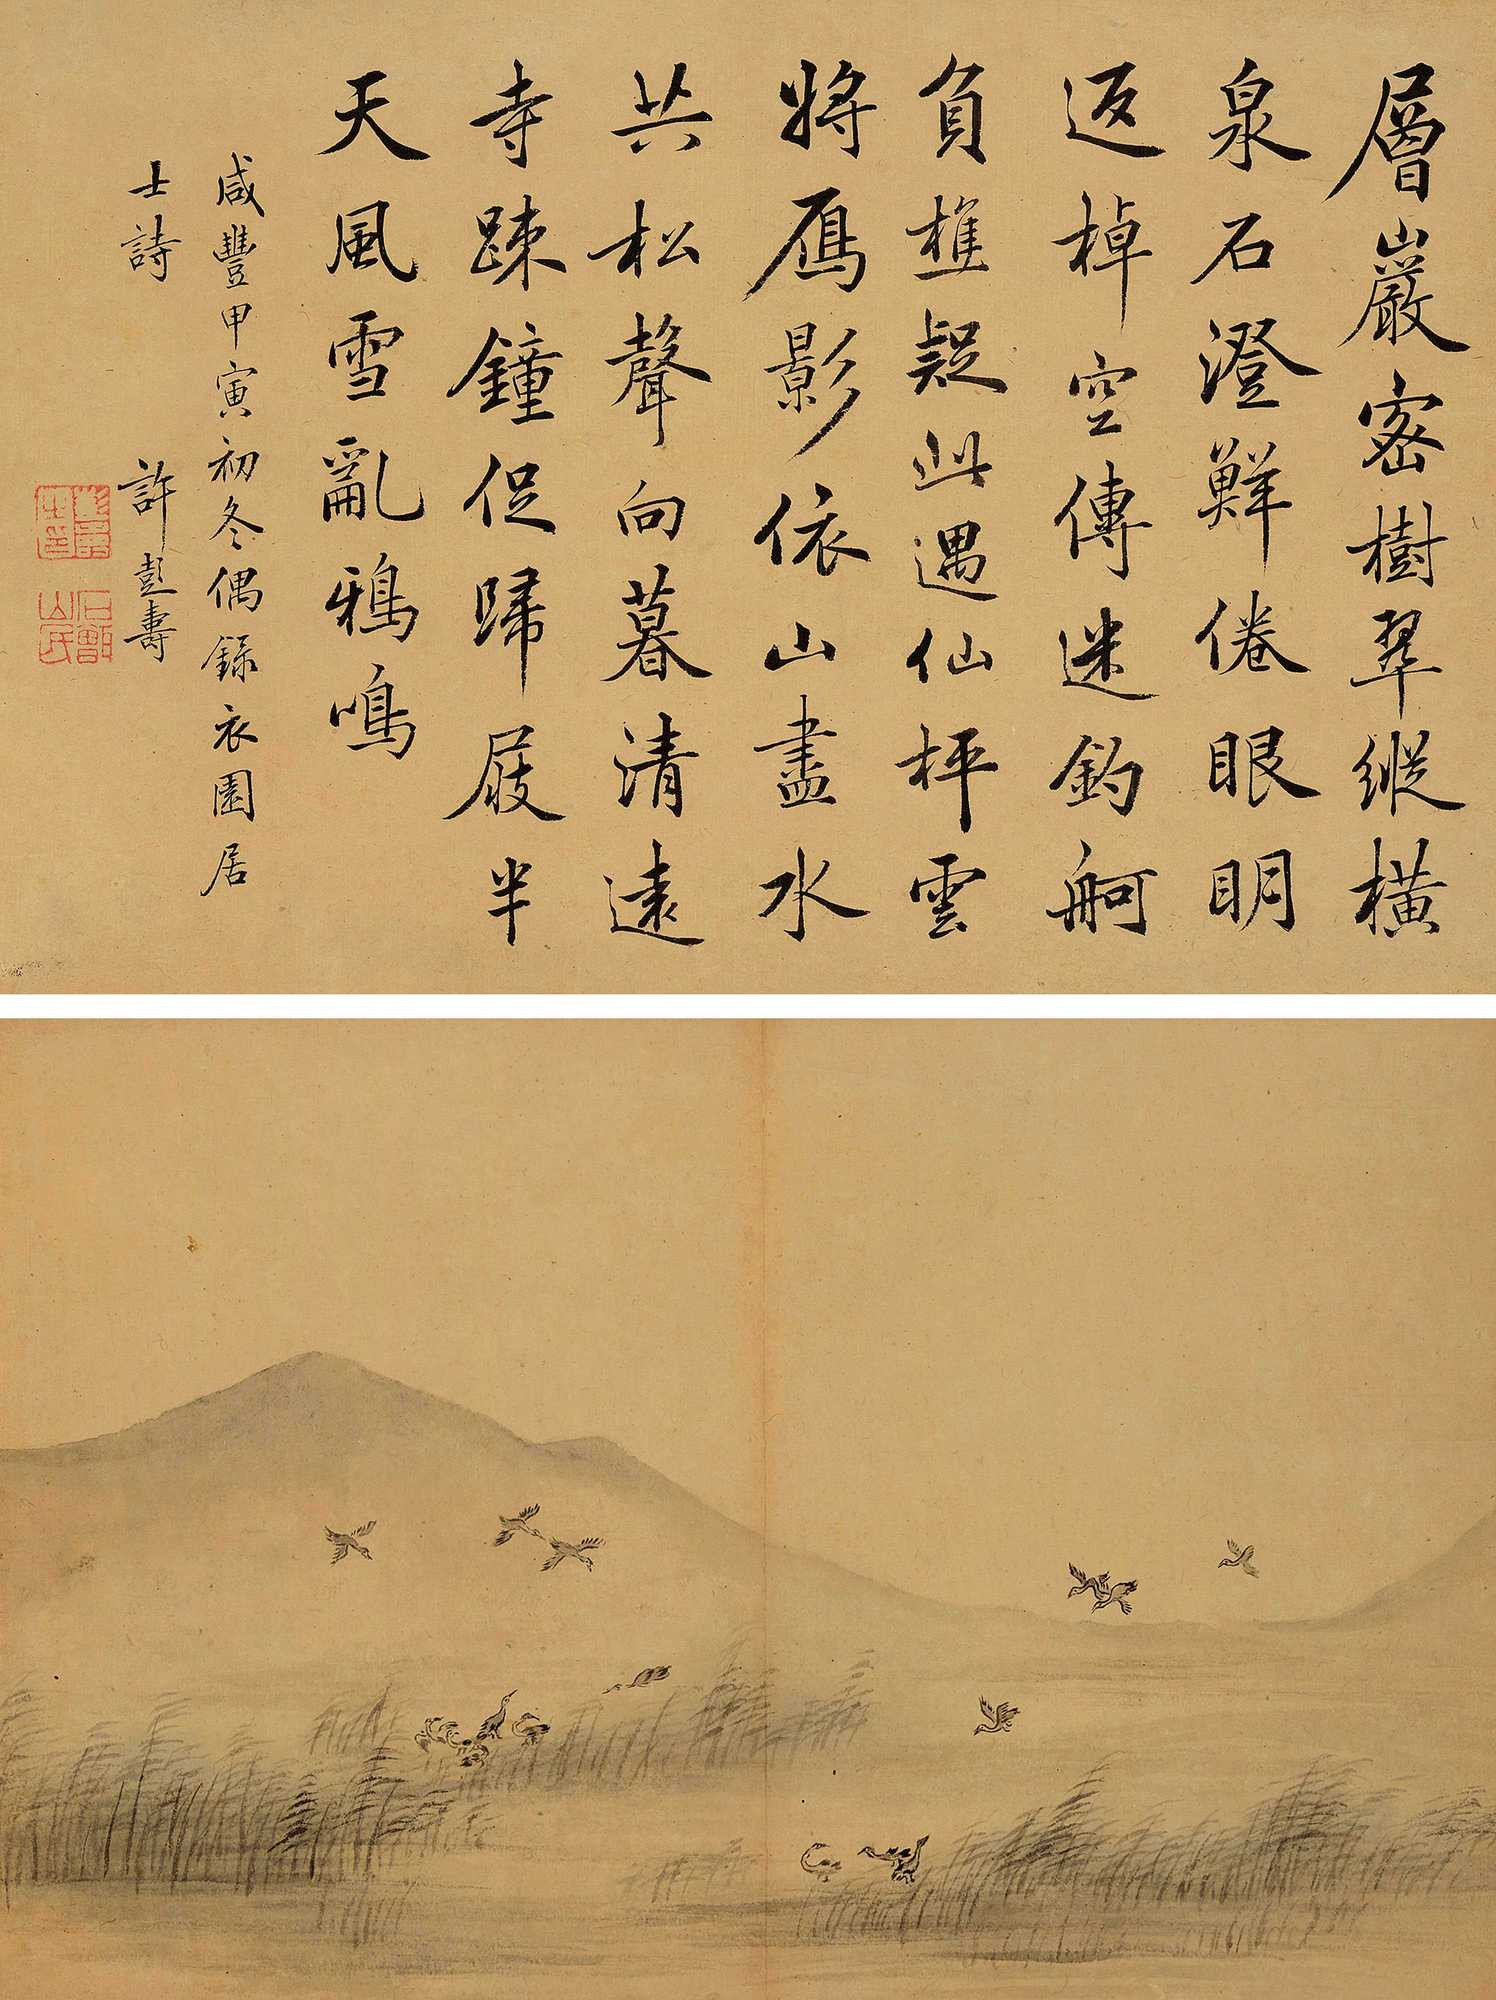 Landscape and Calligraphy